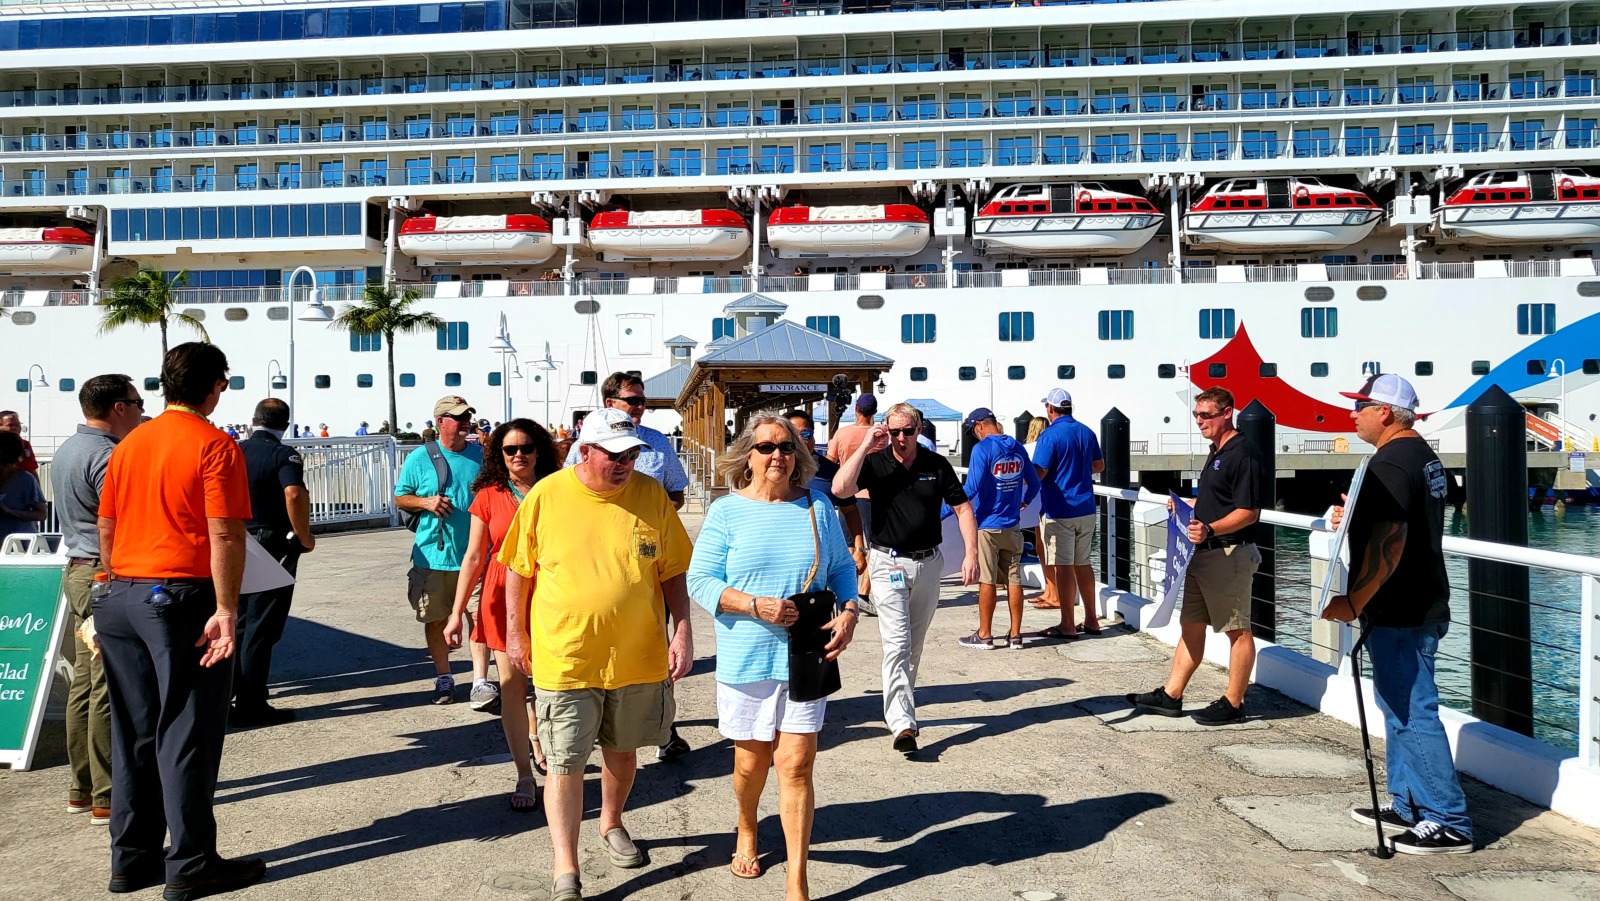 CRUISE SHIPS NEW RULES ARE UNDERWAY IN KEY WEST